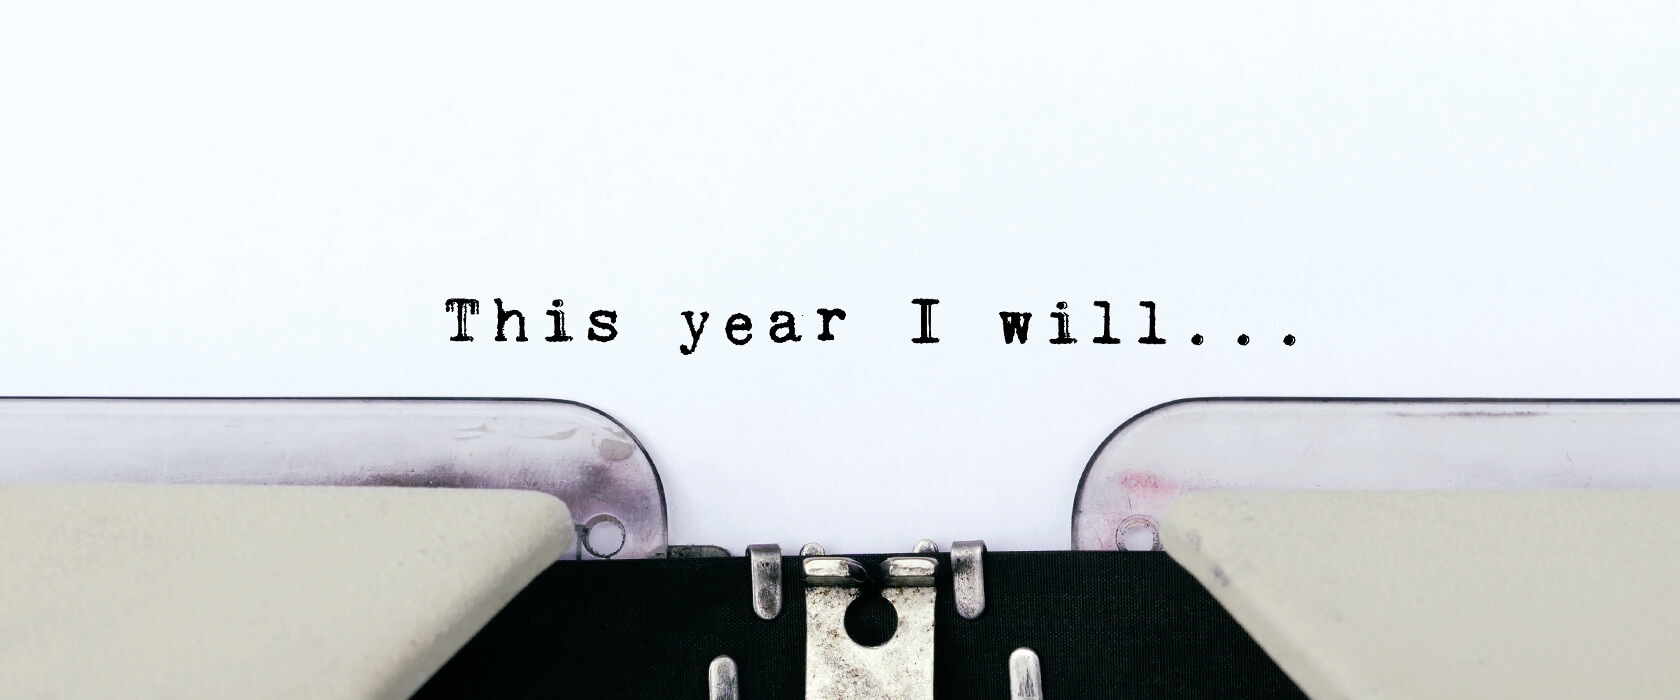 View of a new years resolution paper in typewriter, "This year I will"